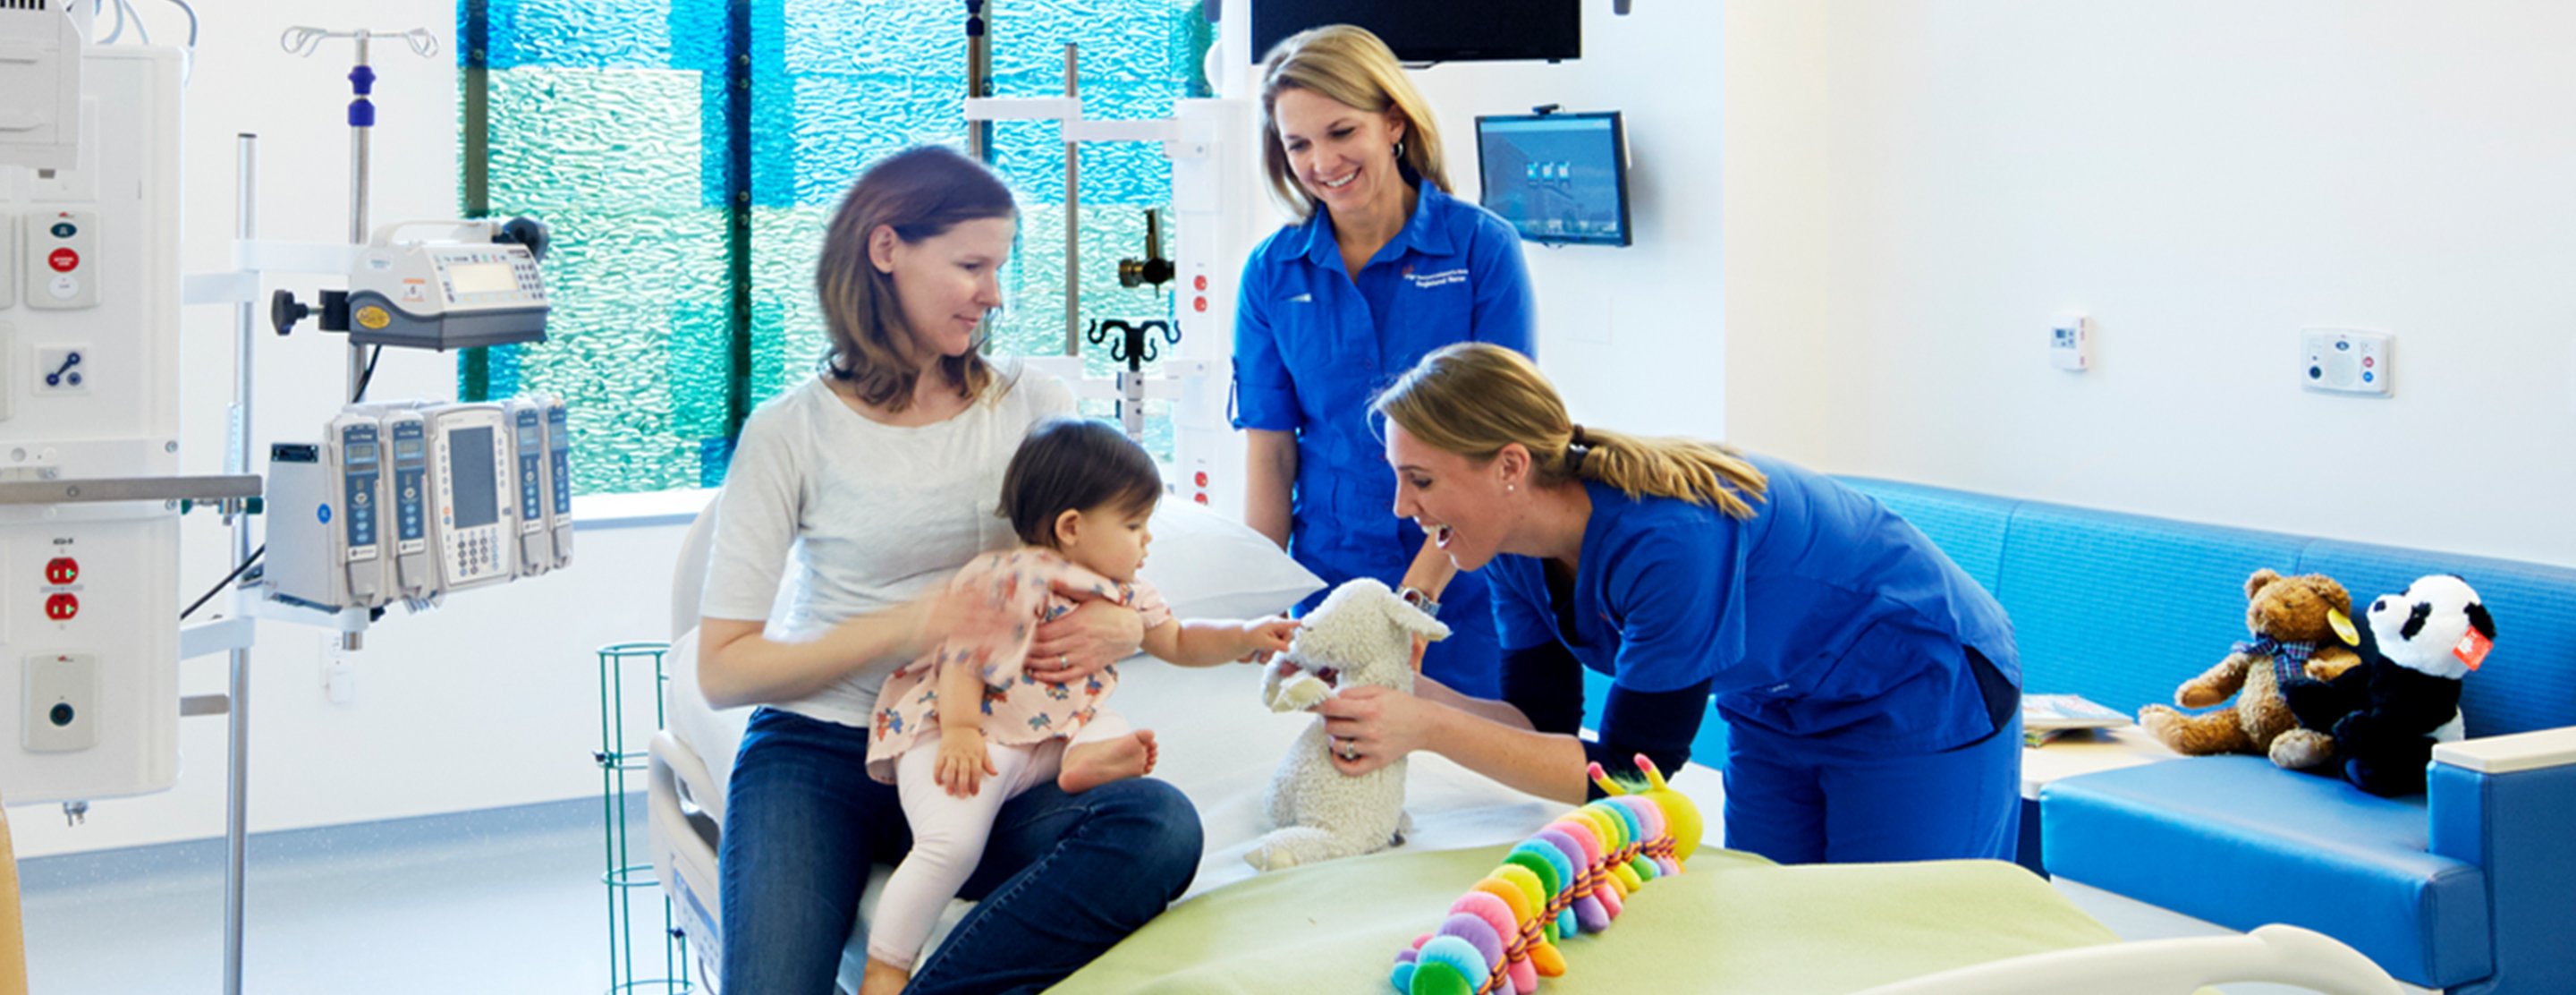 quality-of-patient-care-ucsf-benioff-childrens-hospital-san-francisco-2x